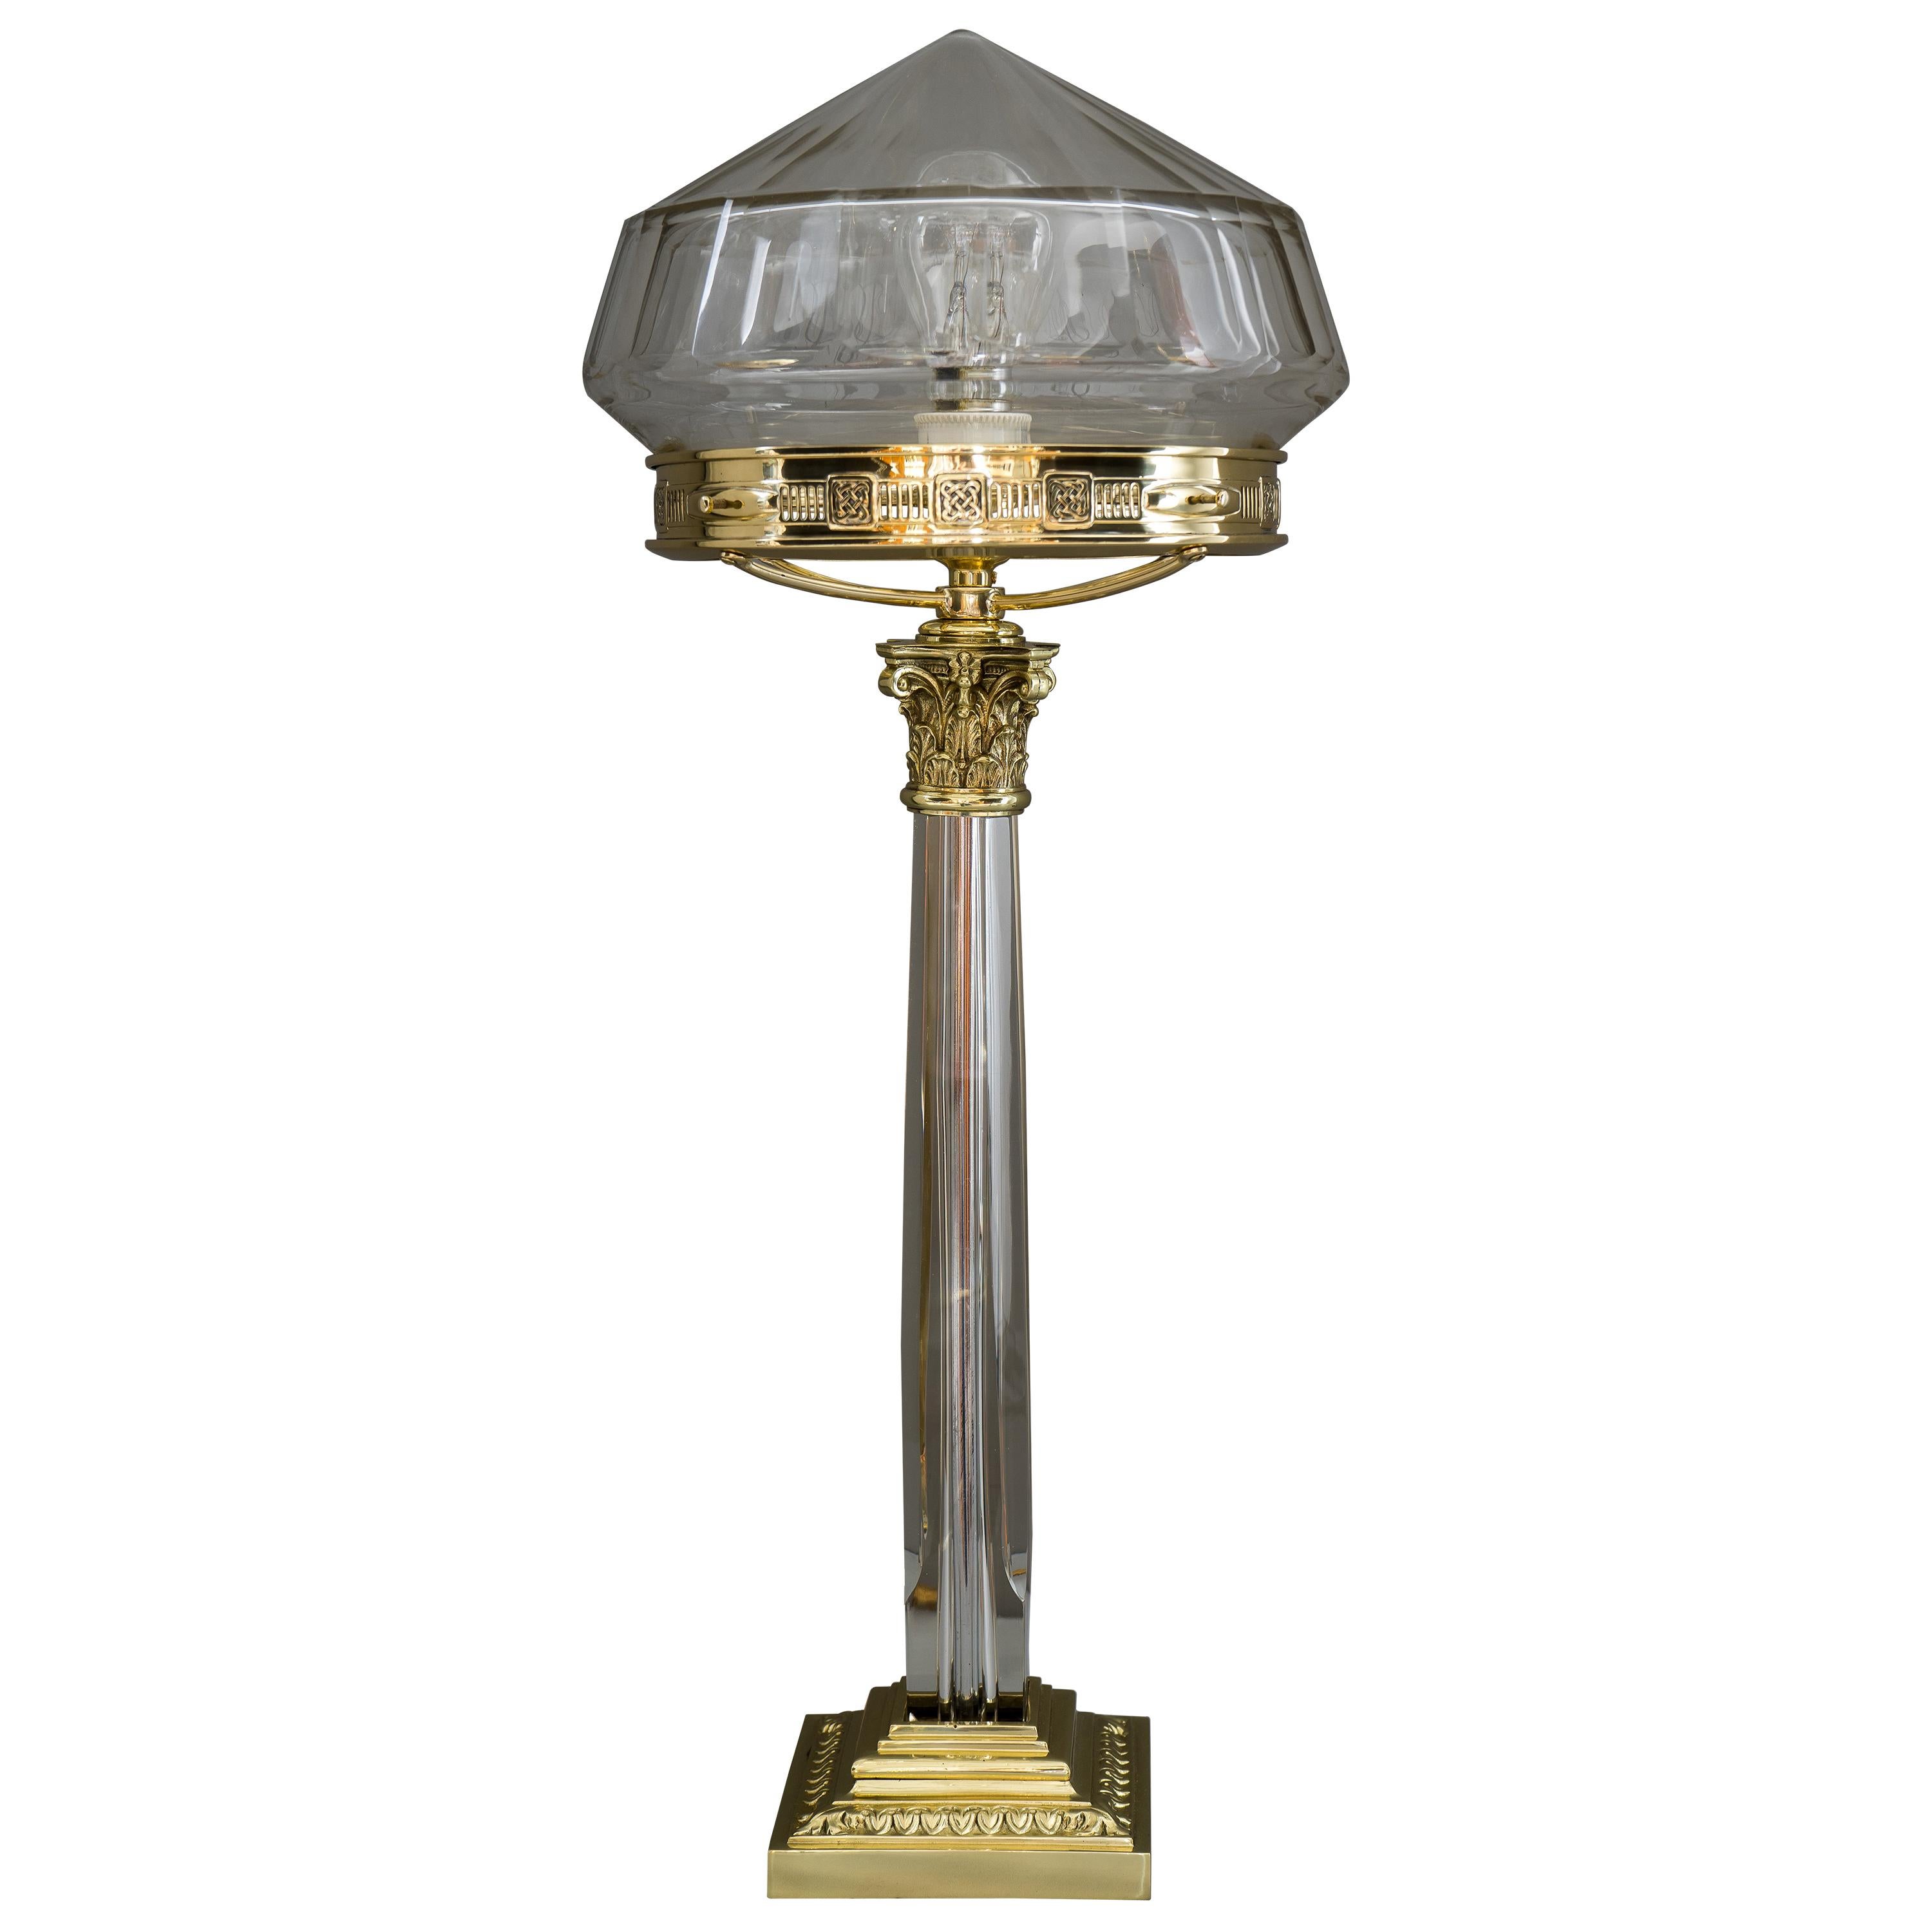 Big Jugendstil Table Lamp with Cut Glass Shade, Vienna, 1908s